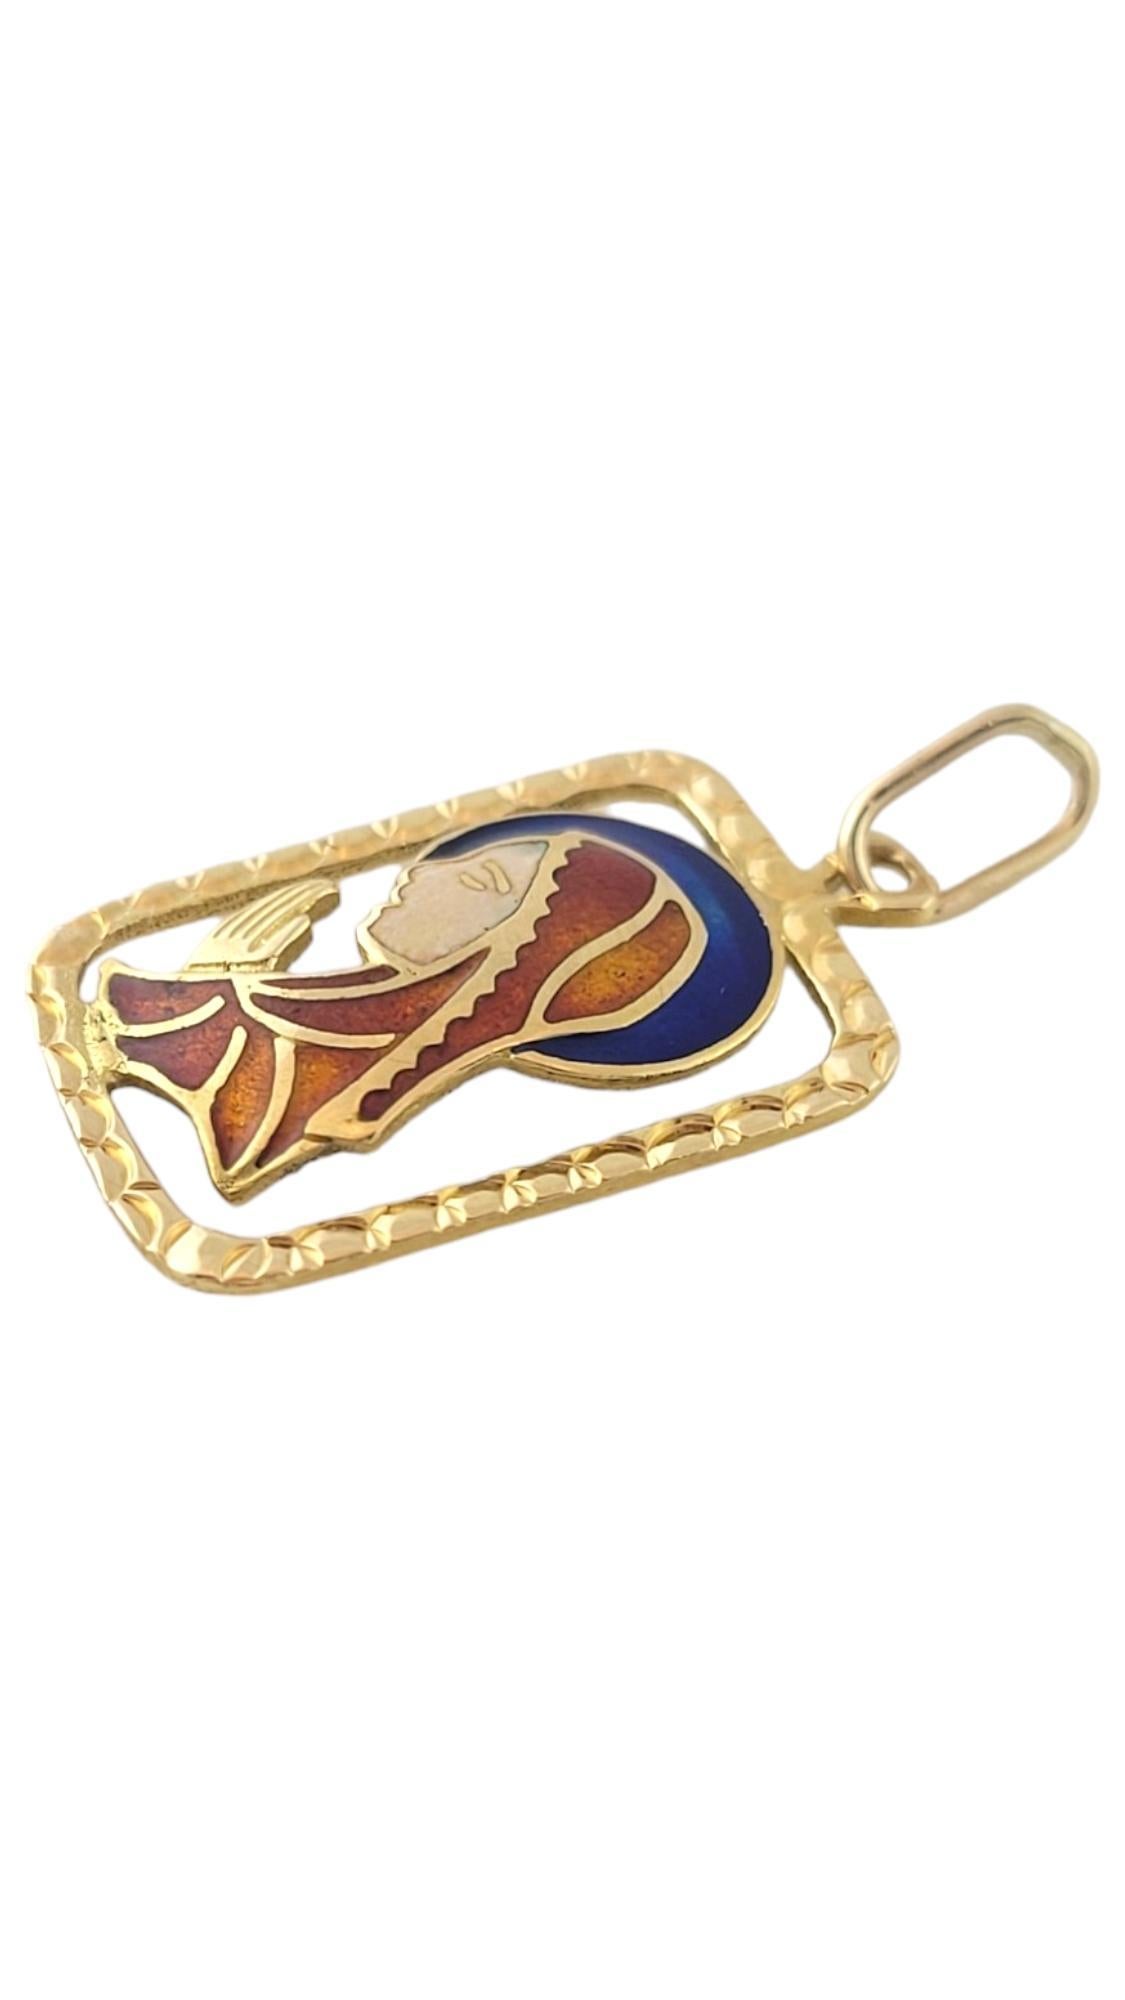 Vintage 14K yellow Gold Enamel Virgin Mary Pendant

This gorgeous virgin Mary pendant is crafted from 14K yellow gold and beautiful blue and orange enamel!

Size: 22.9mm X 15.7mm X 2.93mm
Length w/ bail: 31.5mm

Weight: 2.0 dwt/ 3.1 g

Tested